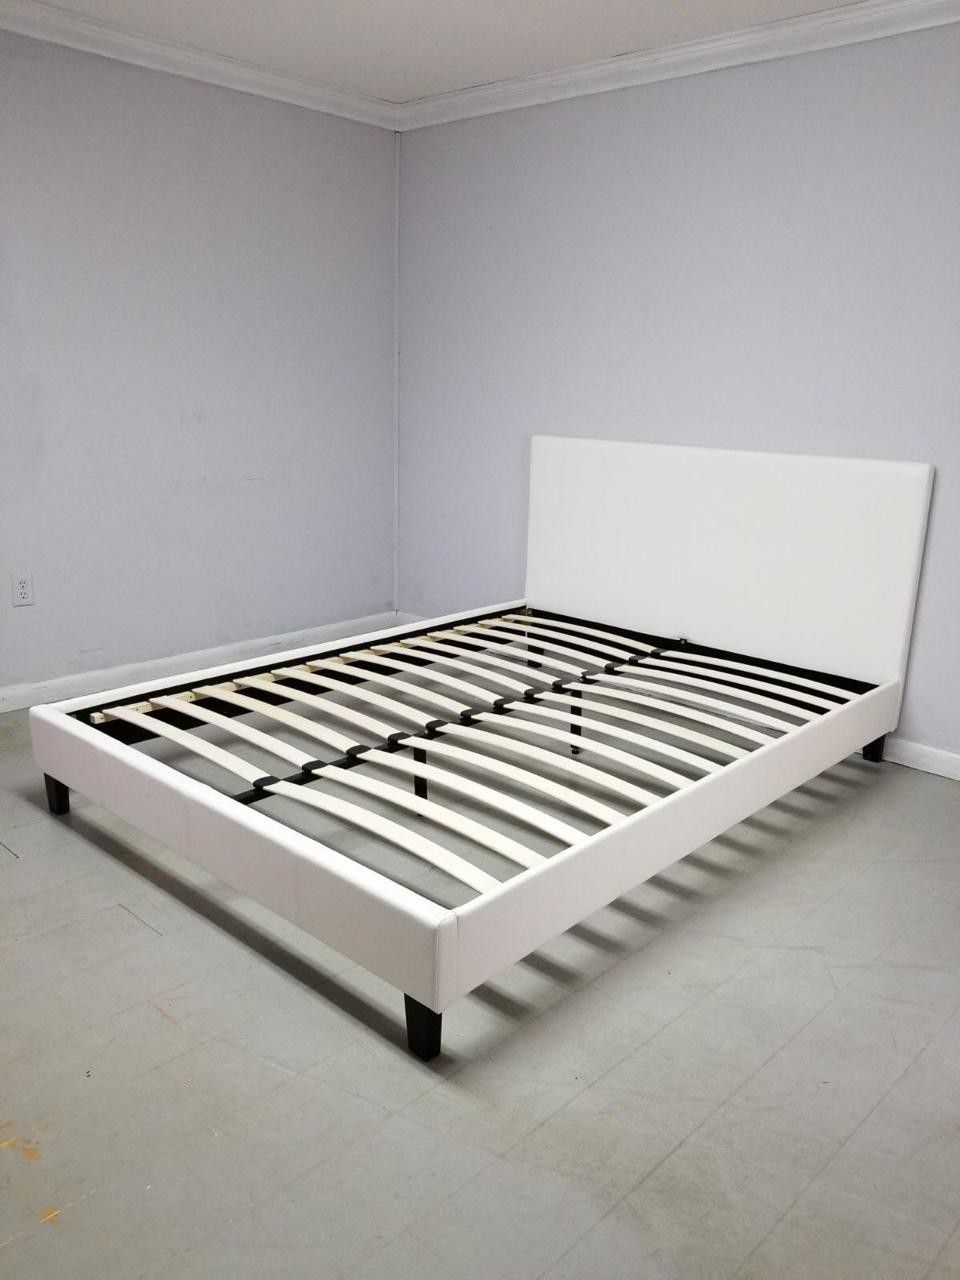 New bed in its box. $179 Twin $199 full $219 queen $269 king